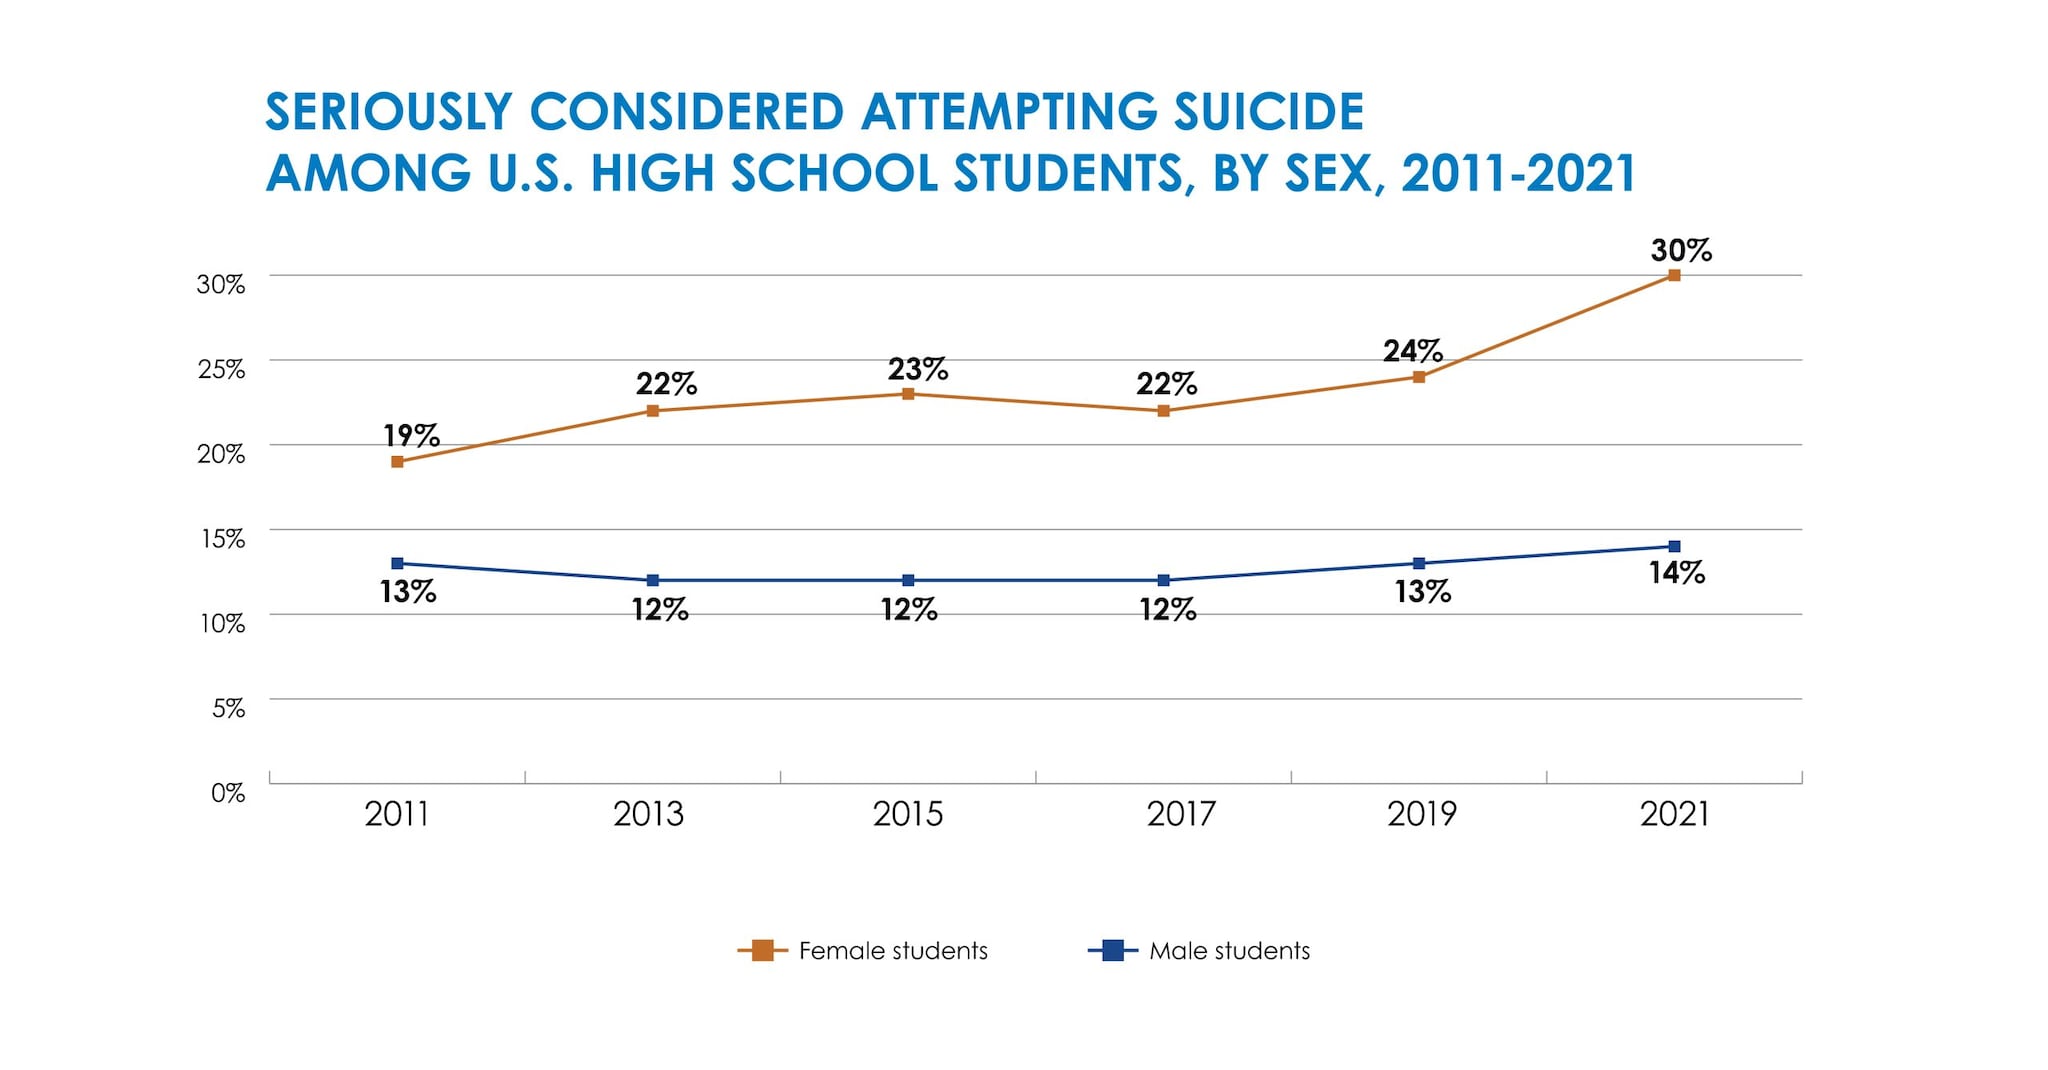 Double line graph showing 2011-2021 data on U.S. students who seriously considered attempting suicide by sex, with girls reporting higher levels compared to boys